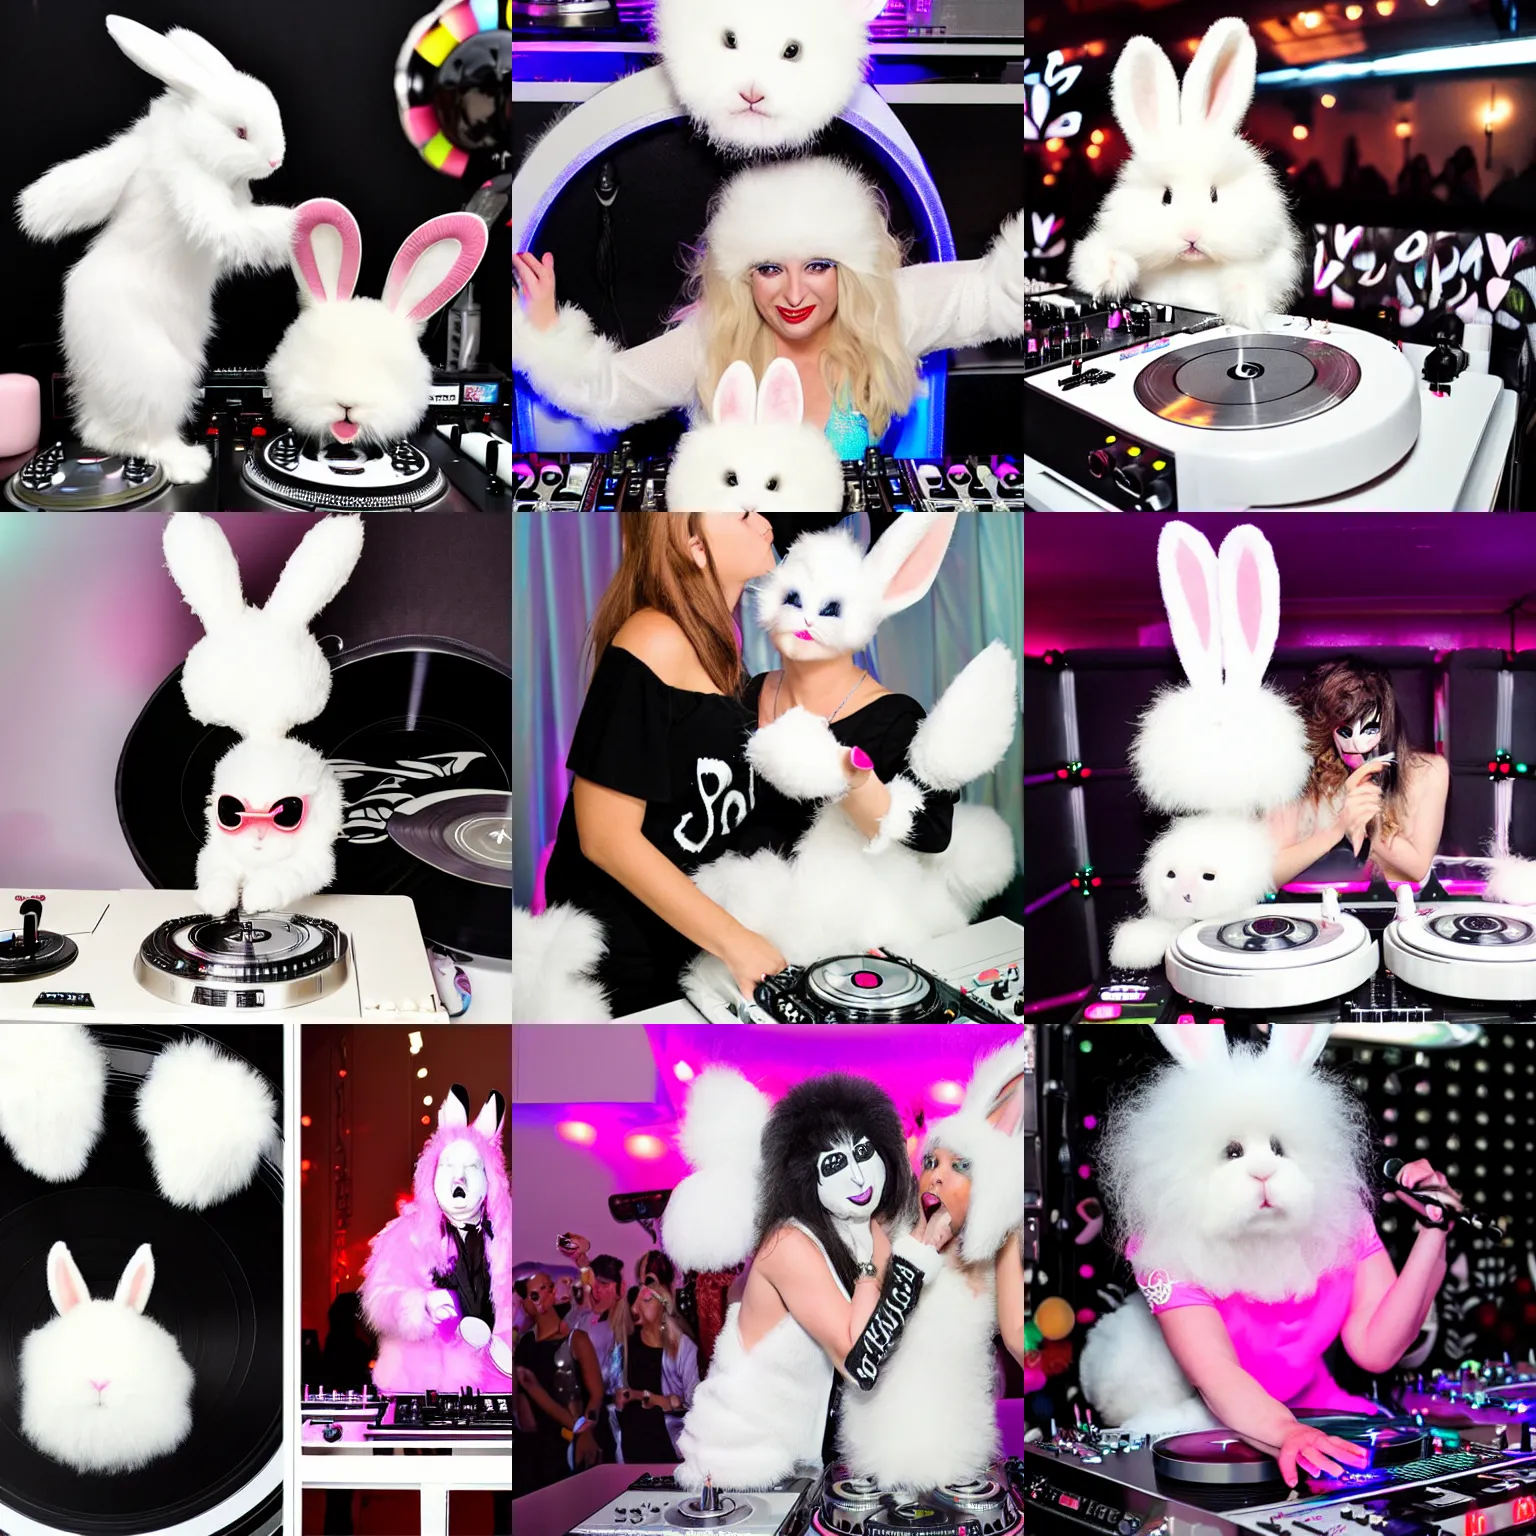 Prompt: super cute fluffy white bunny rabbit in gene simmons kiss makeup DJing with DJ turntables, photoreal